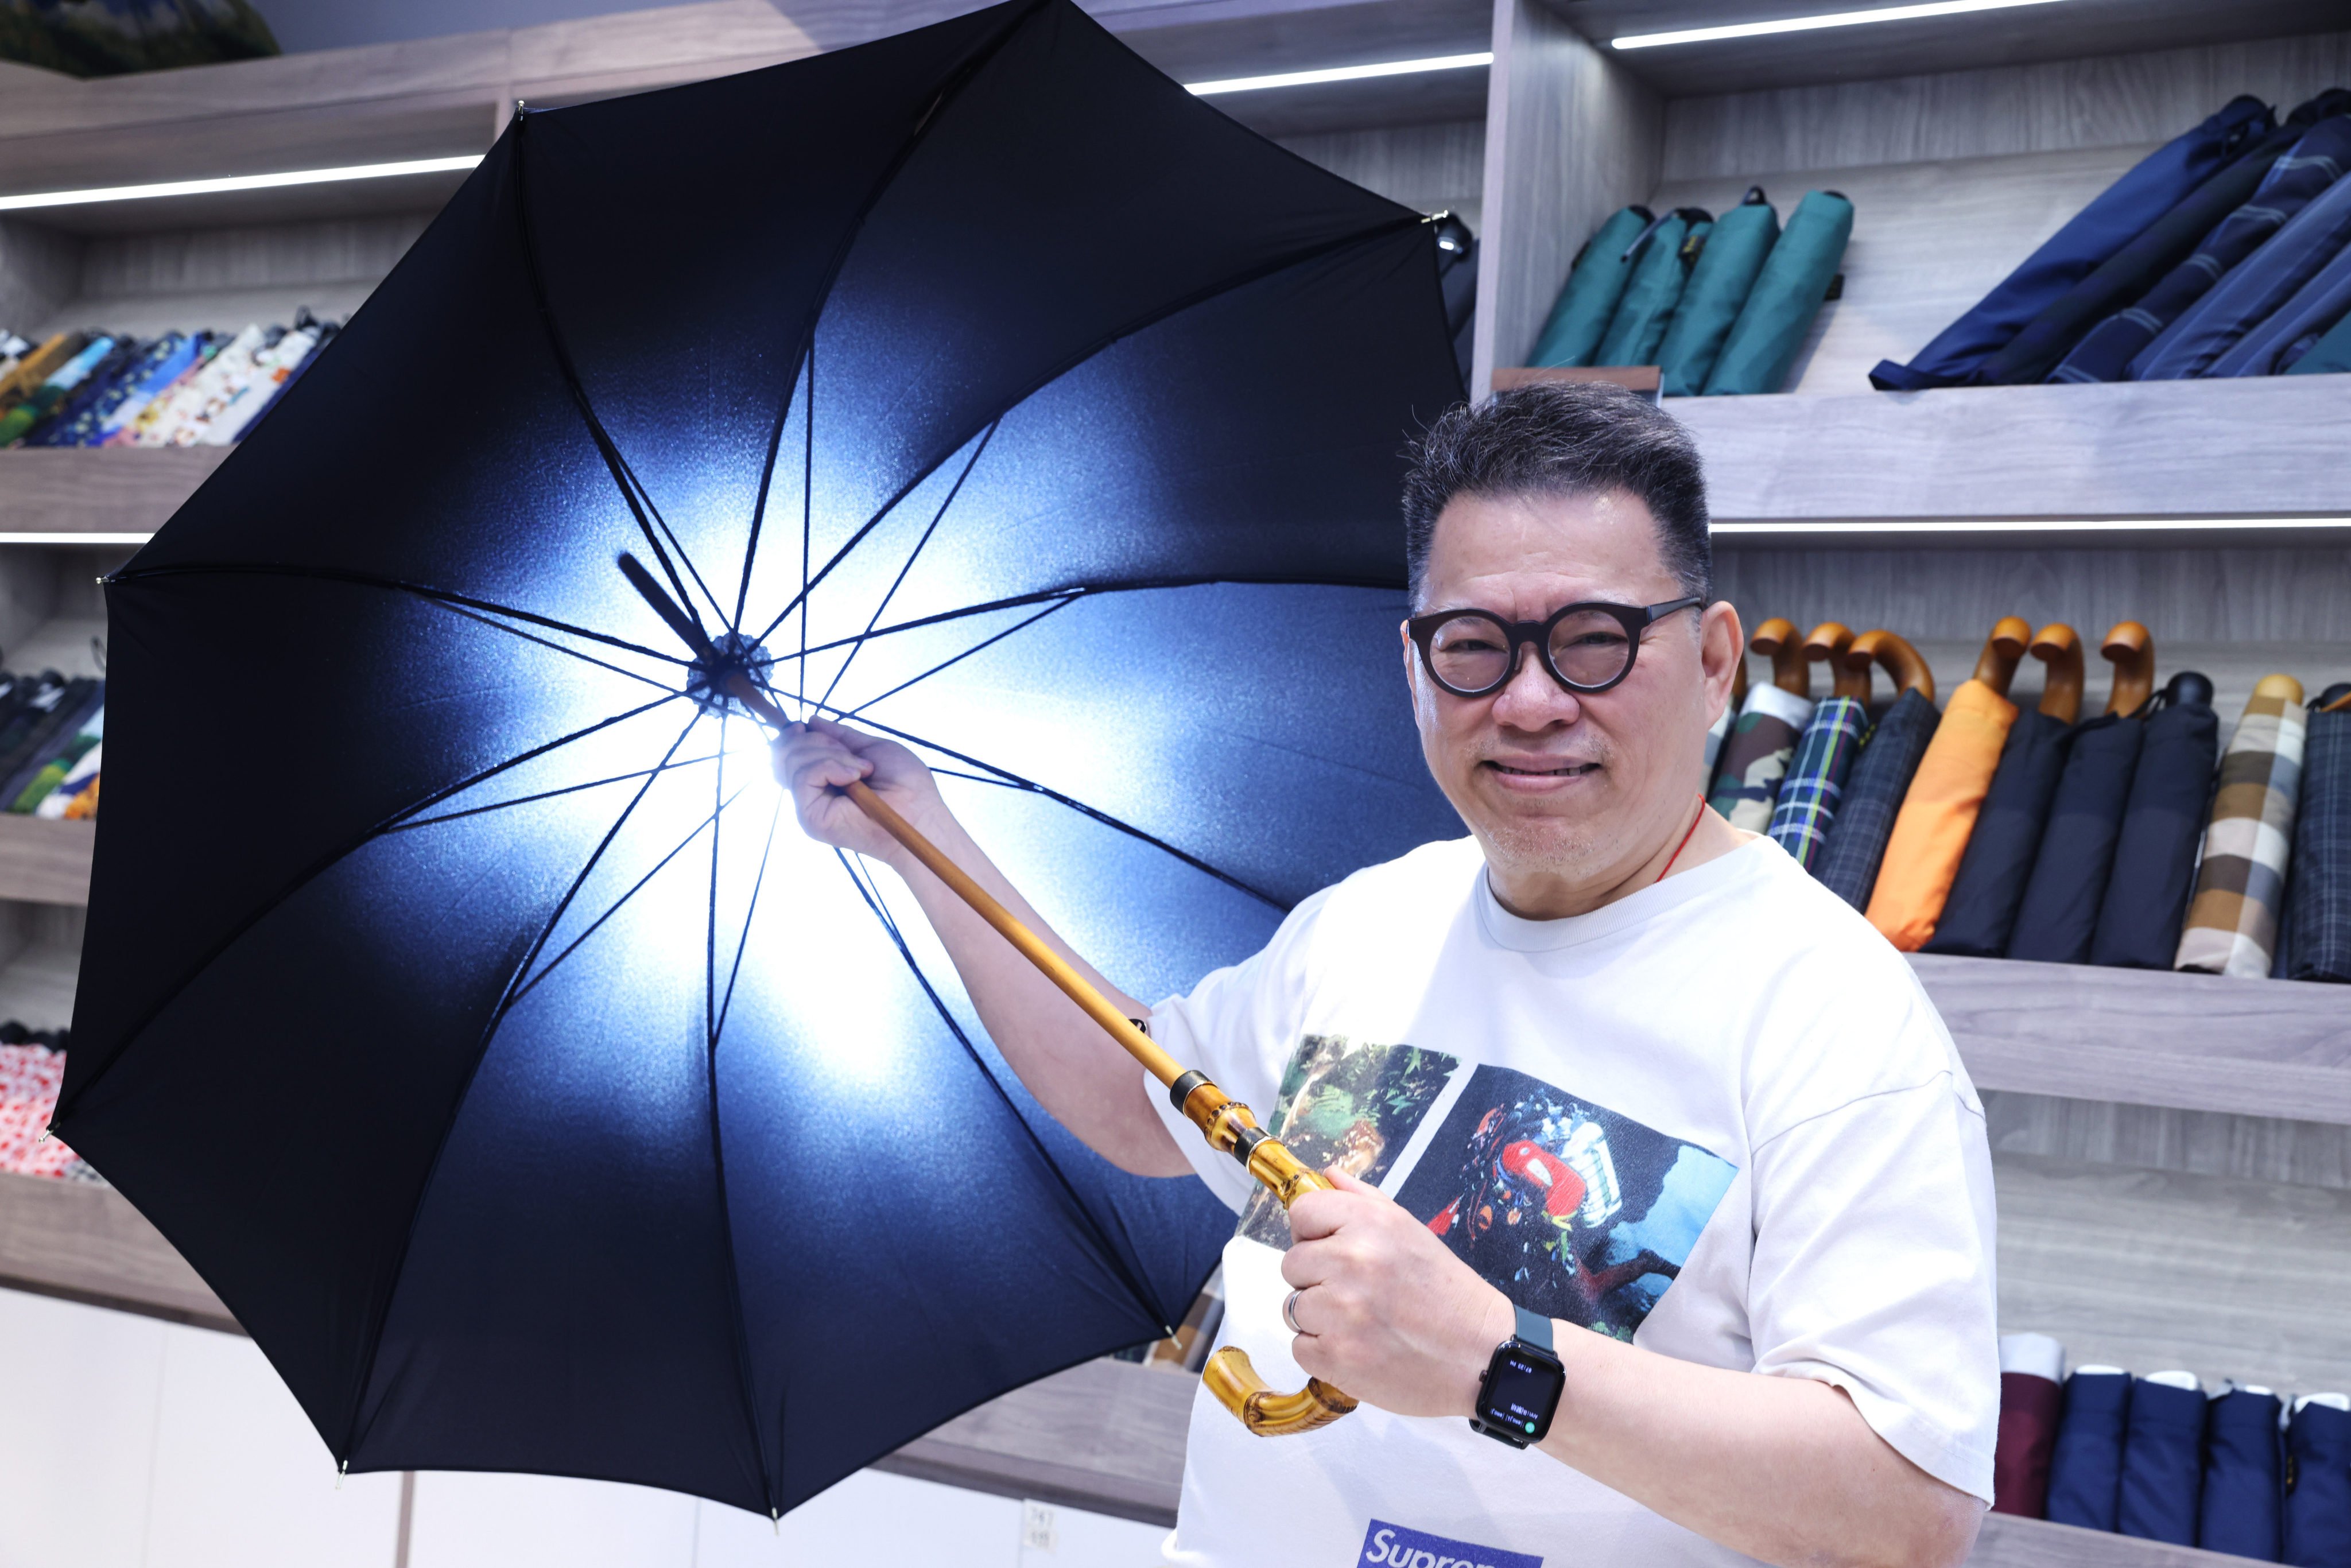 Leung Mang-sing, the fourth-generation owner of Leung So Kee Umbrella Factory, one of the oldest handmade umbrella manufacturers in China, holds one of the company’s items at its Park Lane Shopper’s Boulevard store in Tsim Sha Tsui, Hong Kong. Photo: Yik Yeung-man